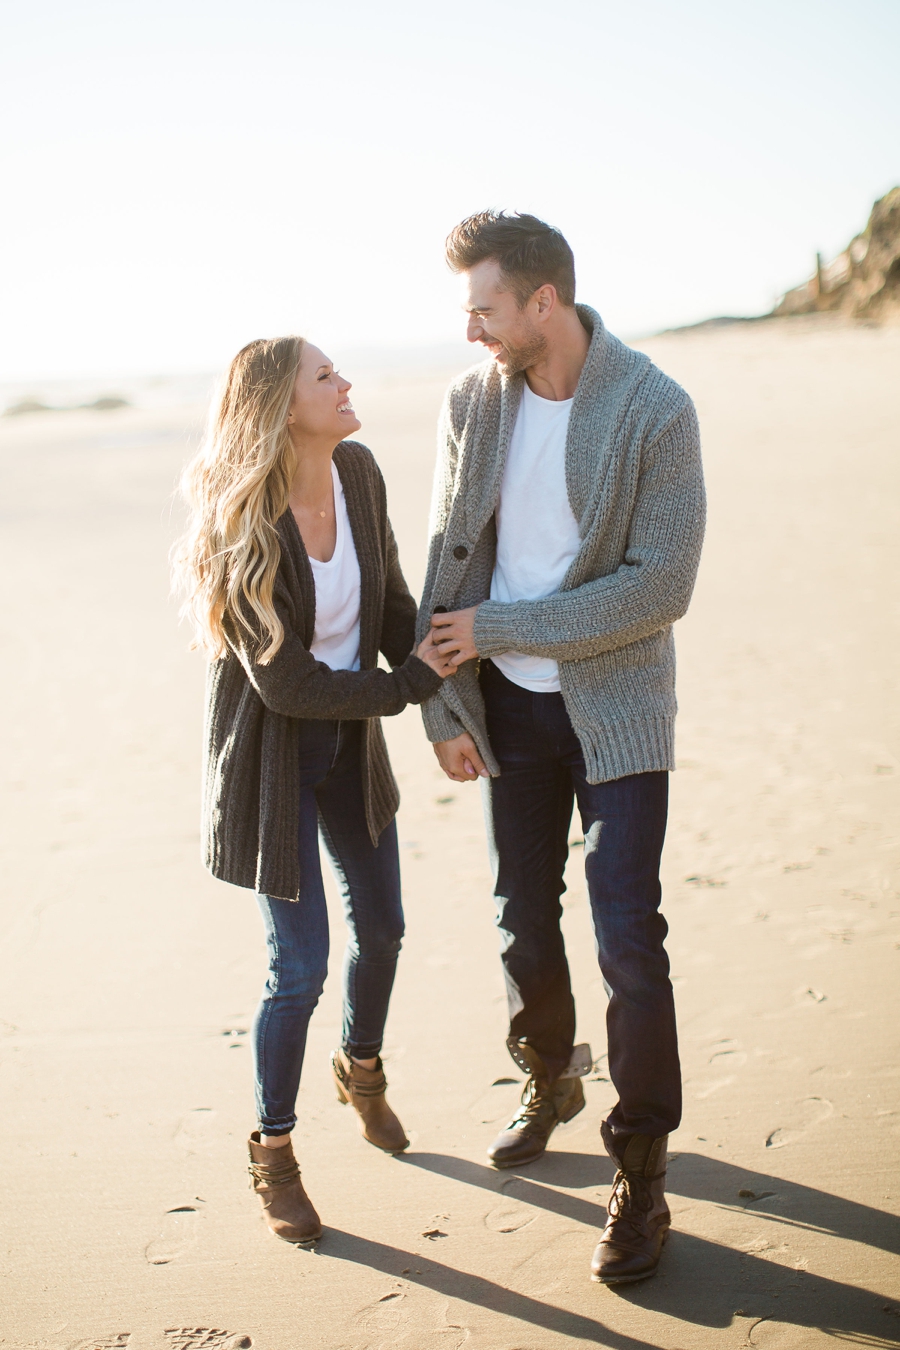 taylor_kinzie_photography_los_angeles_wedding_photographer_beach_engagement_session_0013